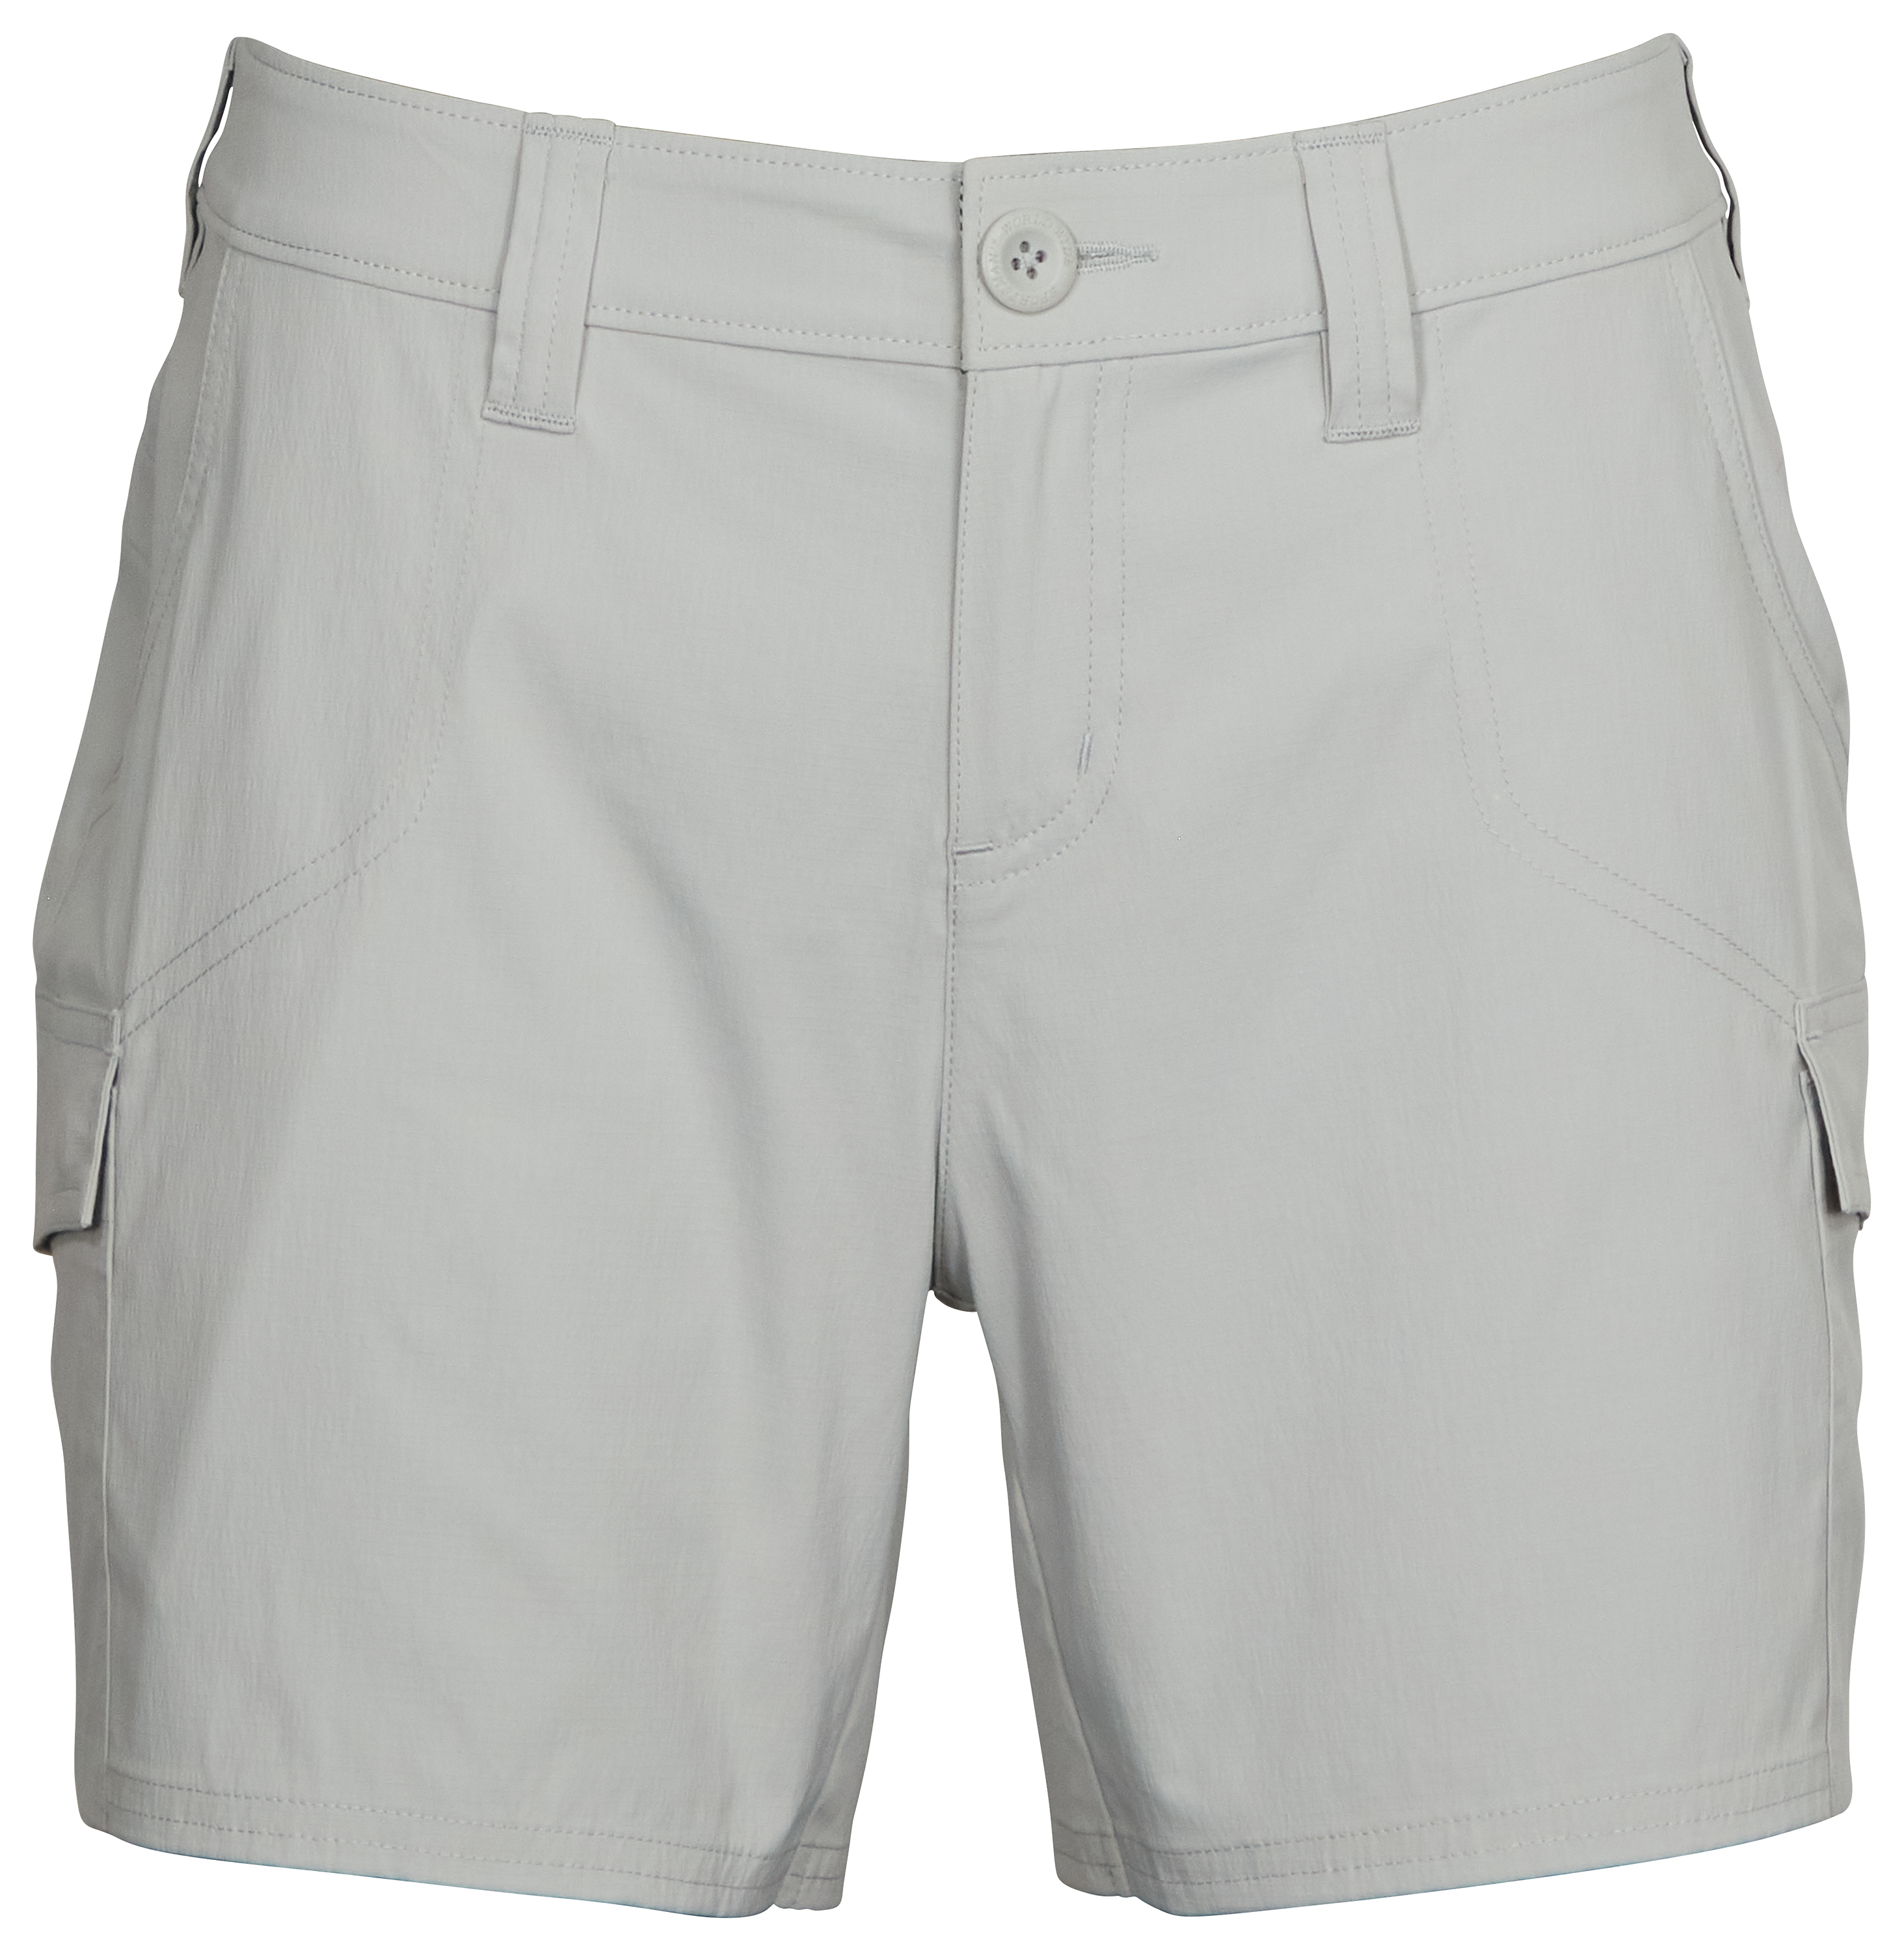 World Wide Sportsman Ripstop Cargo Shorts for Ladies - High Rise - 16